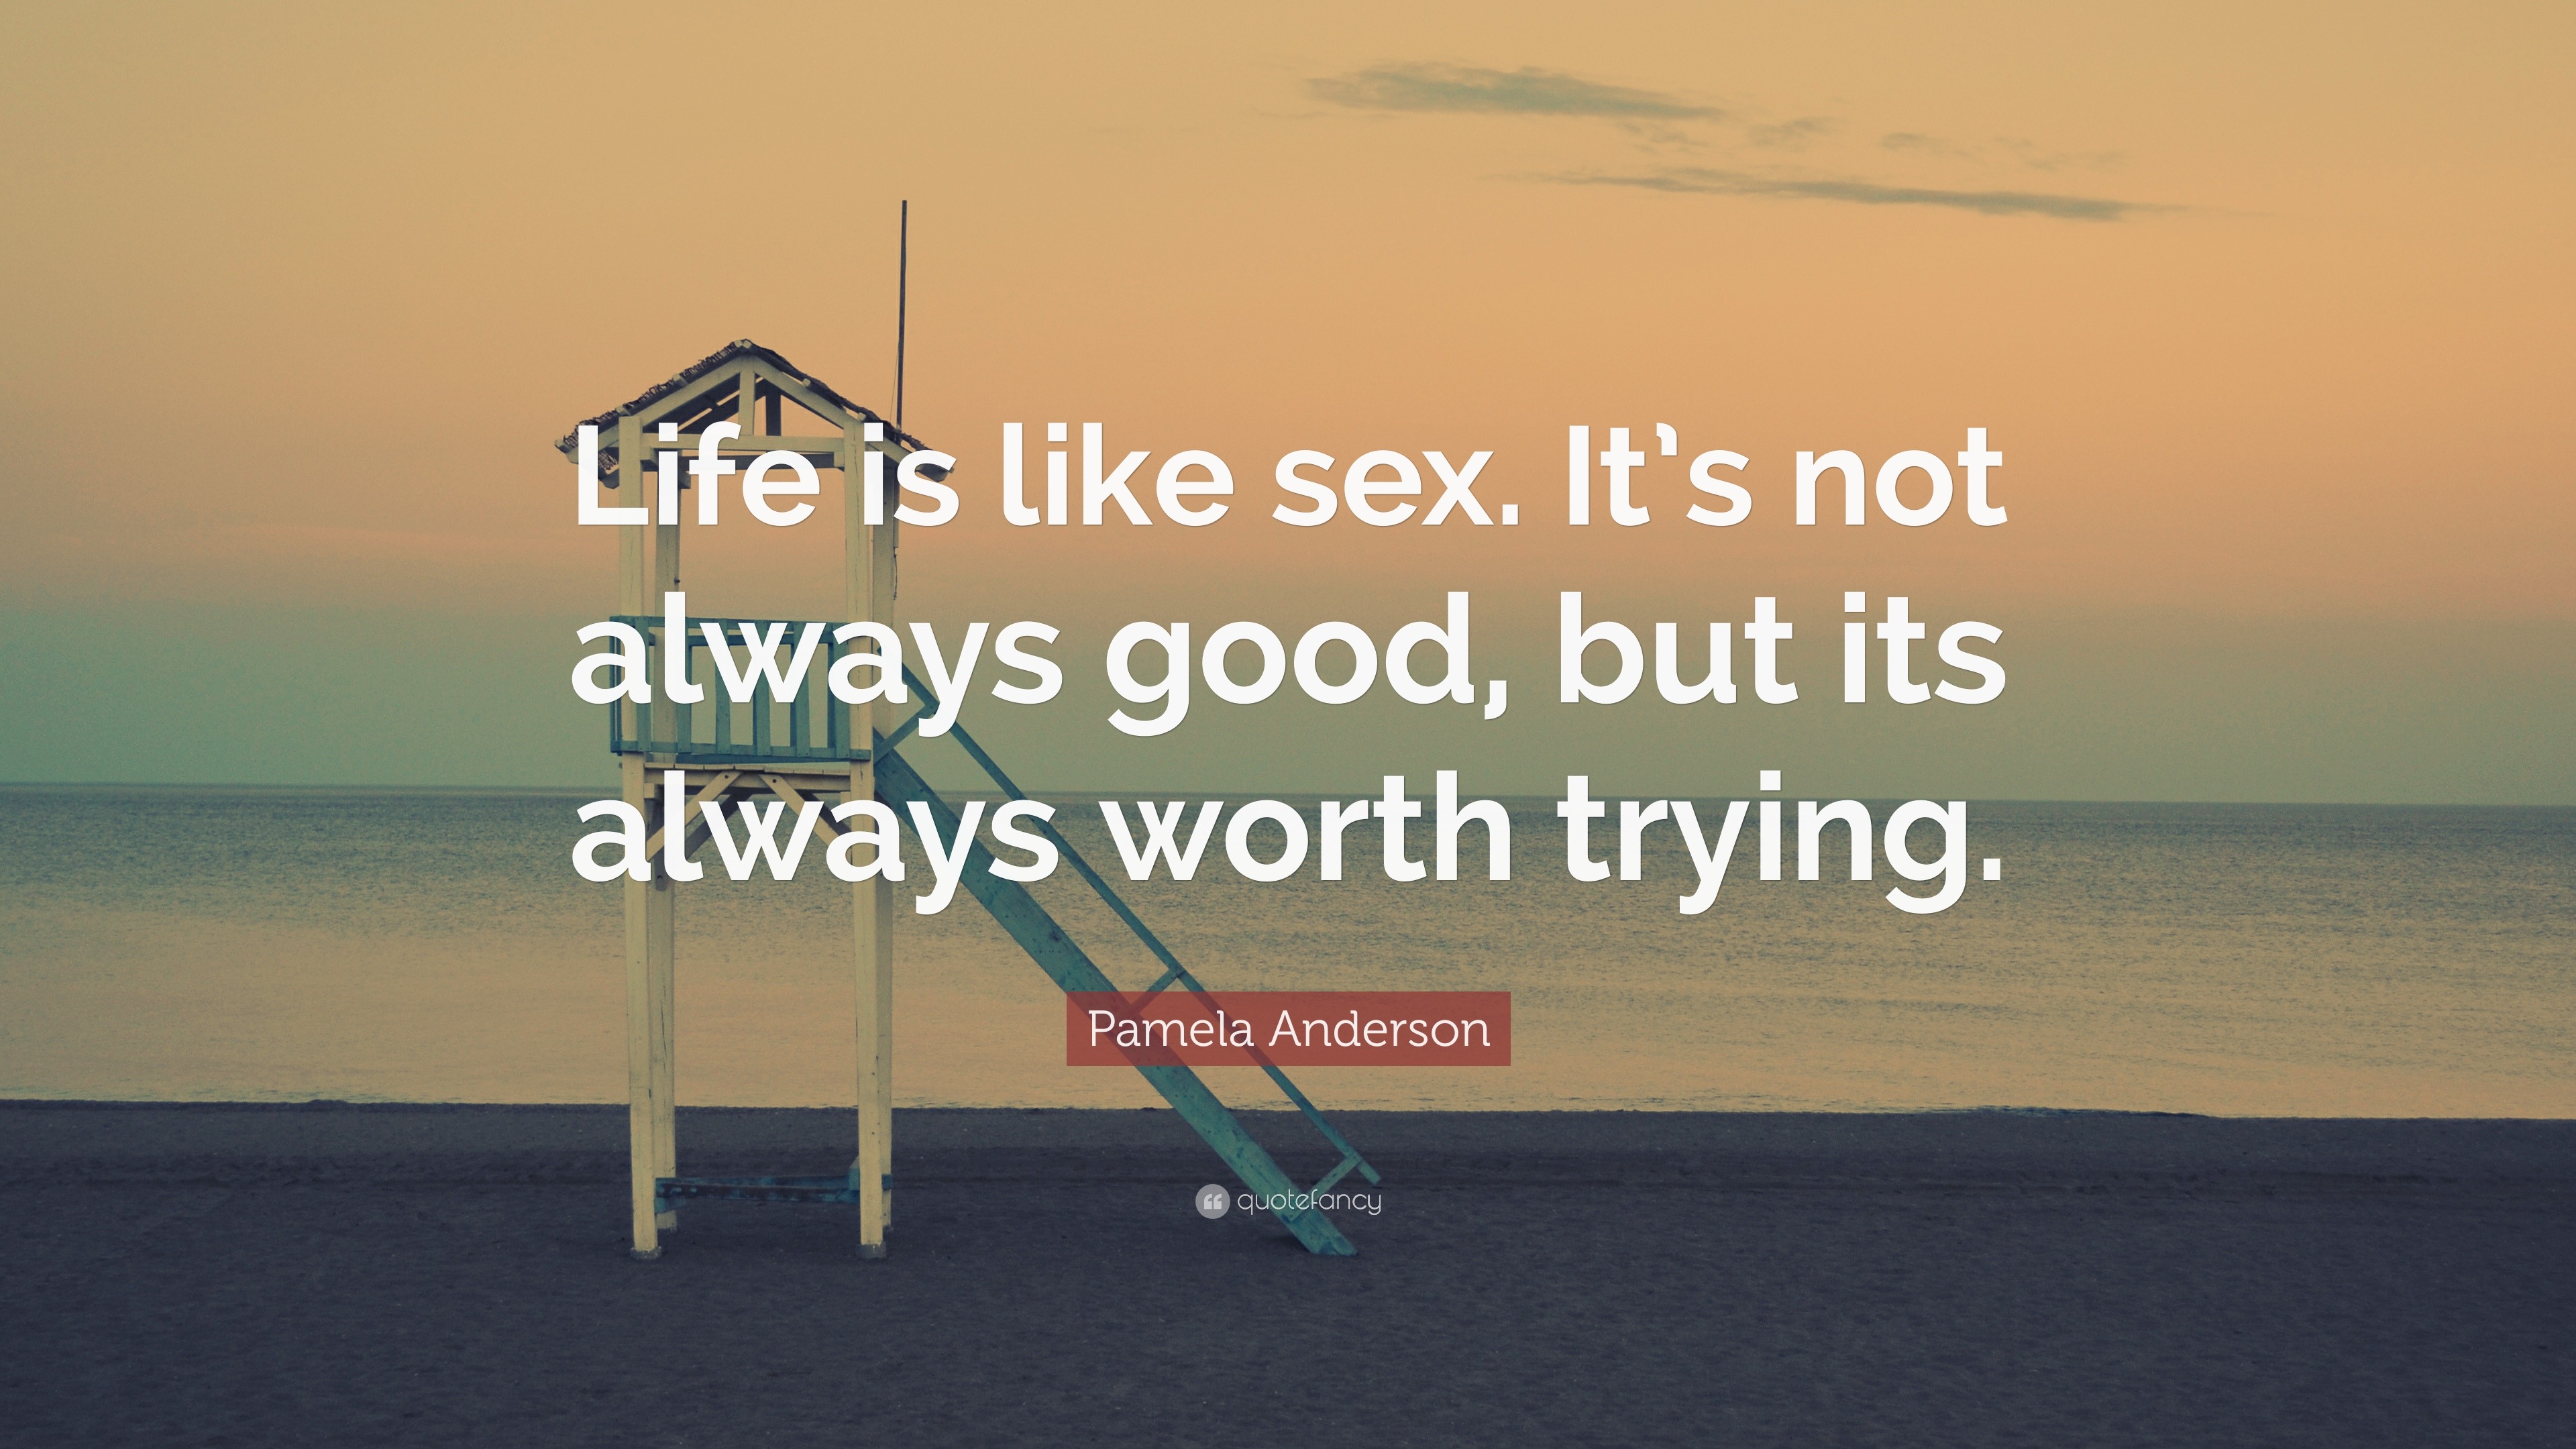 Pamela Anderson Quote “life Is Like Sex Its Not Always Good But Its Always Worth Trying” 2979